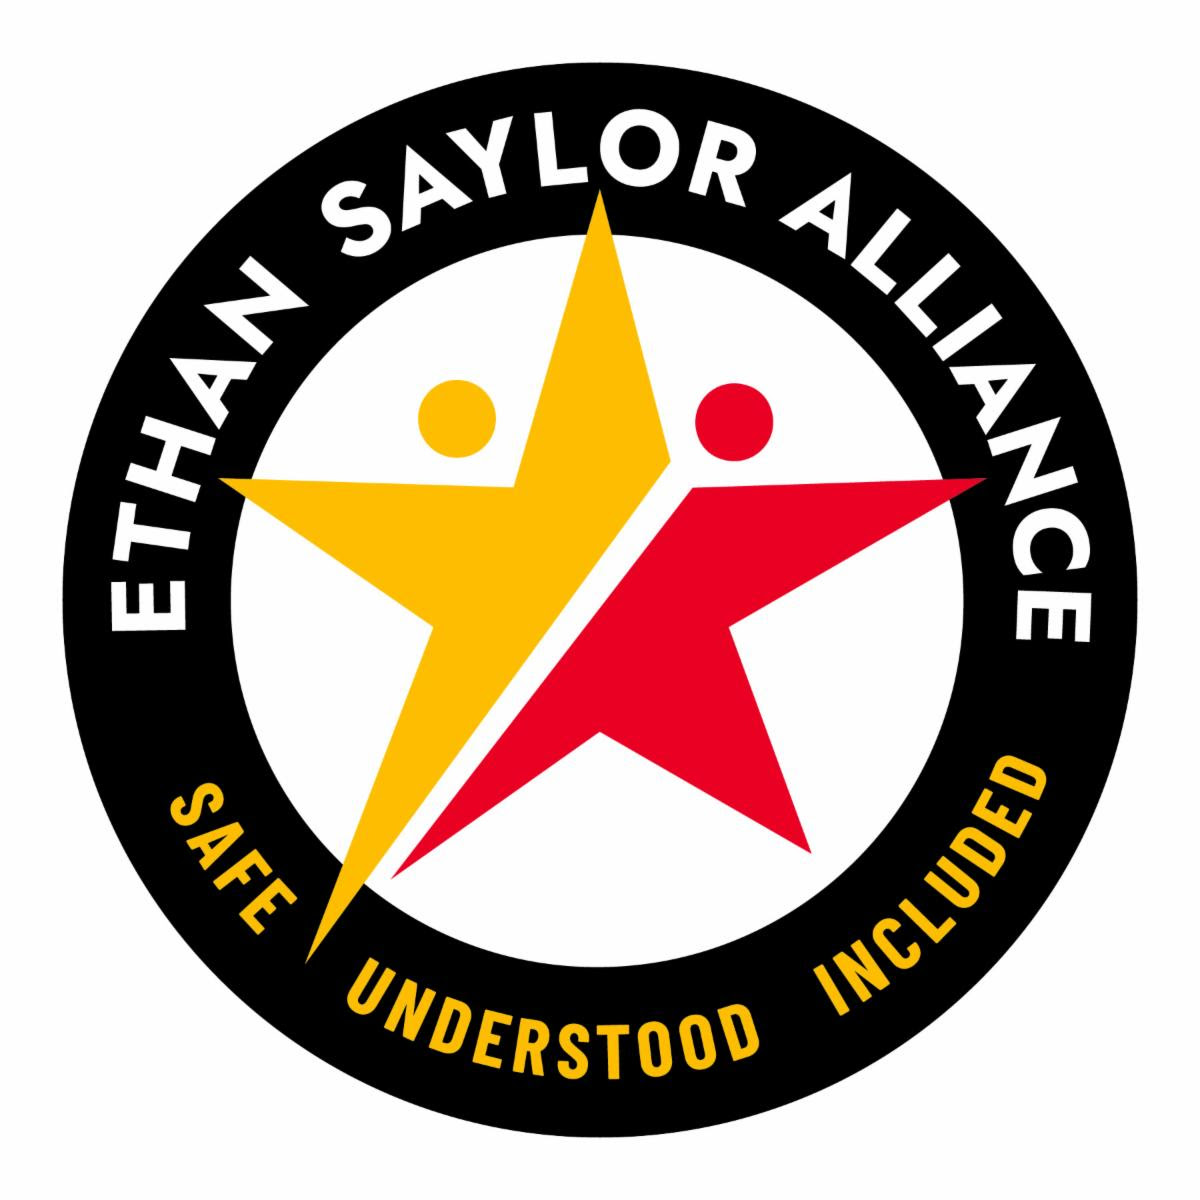 Ethan Saylor Alliance logo includes two figures in gold and red forming a star in center of black ring.  Ring says Ethan Saylor Alliance, Safe, Understood, Included